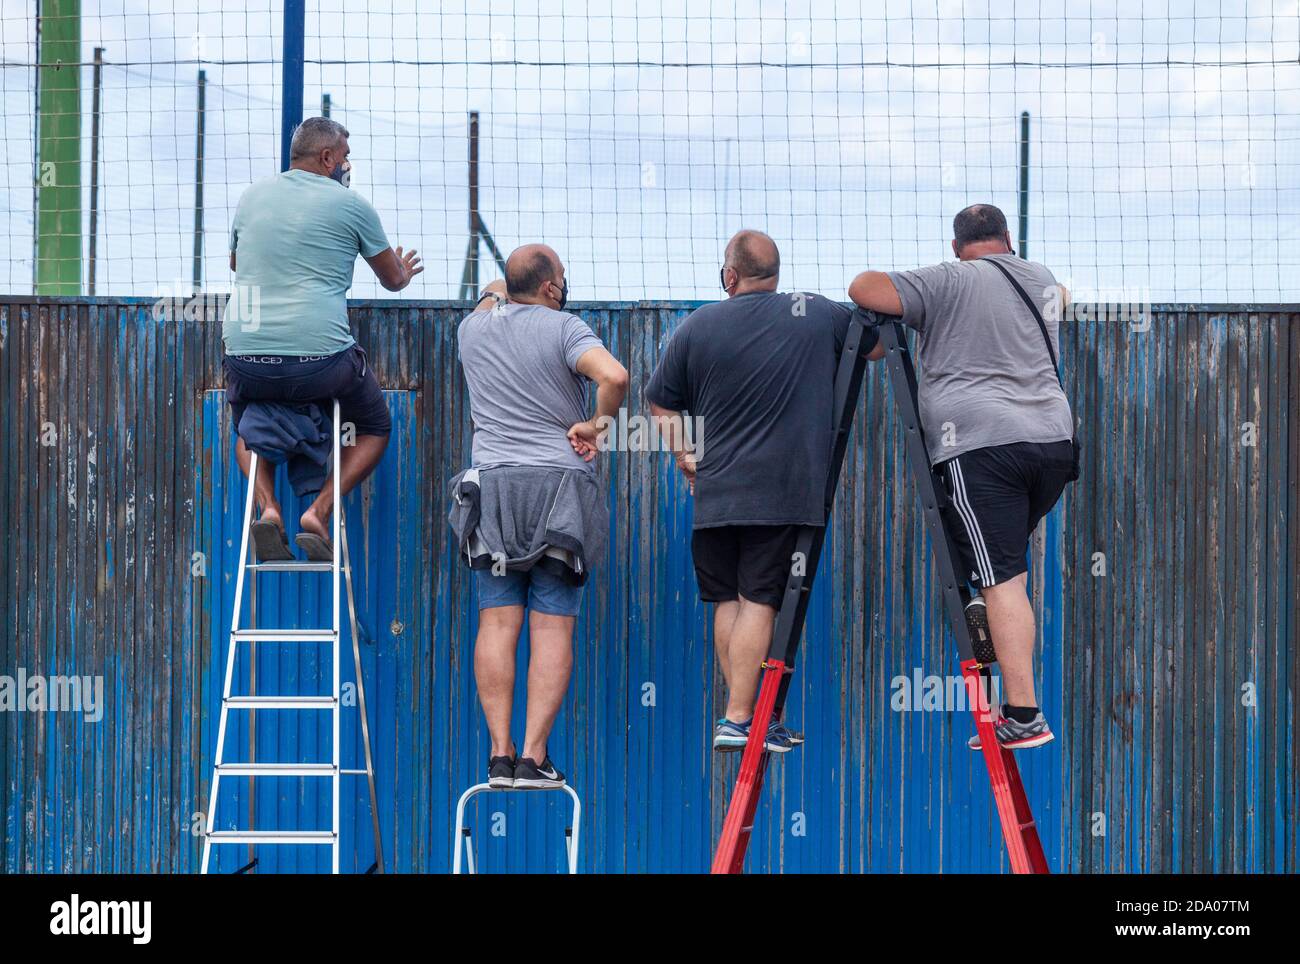 Las Palmas, Gran Canaria, Canary Islands, Spain. 8th November, 2020. Football fans on Gran Canaria using ladders to watch local derby game. Covid restrictions means games have to played behind closed doors. Credit: Alan Dawson/Alamy Live News Stock Photo